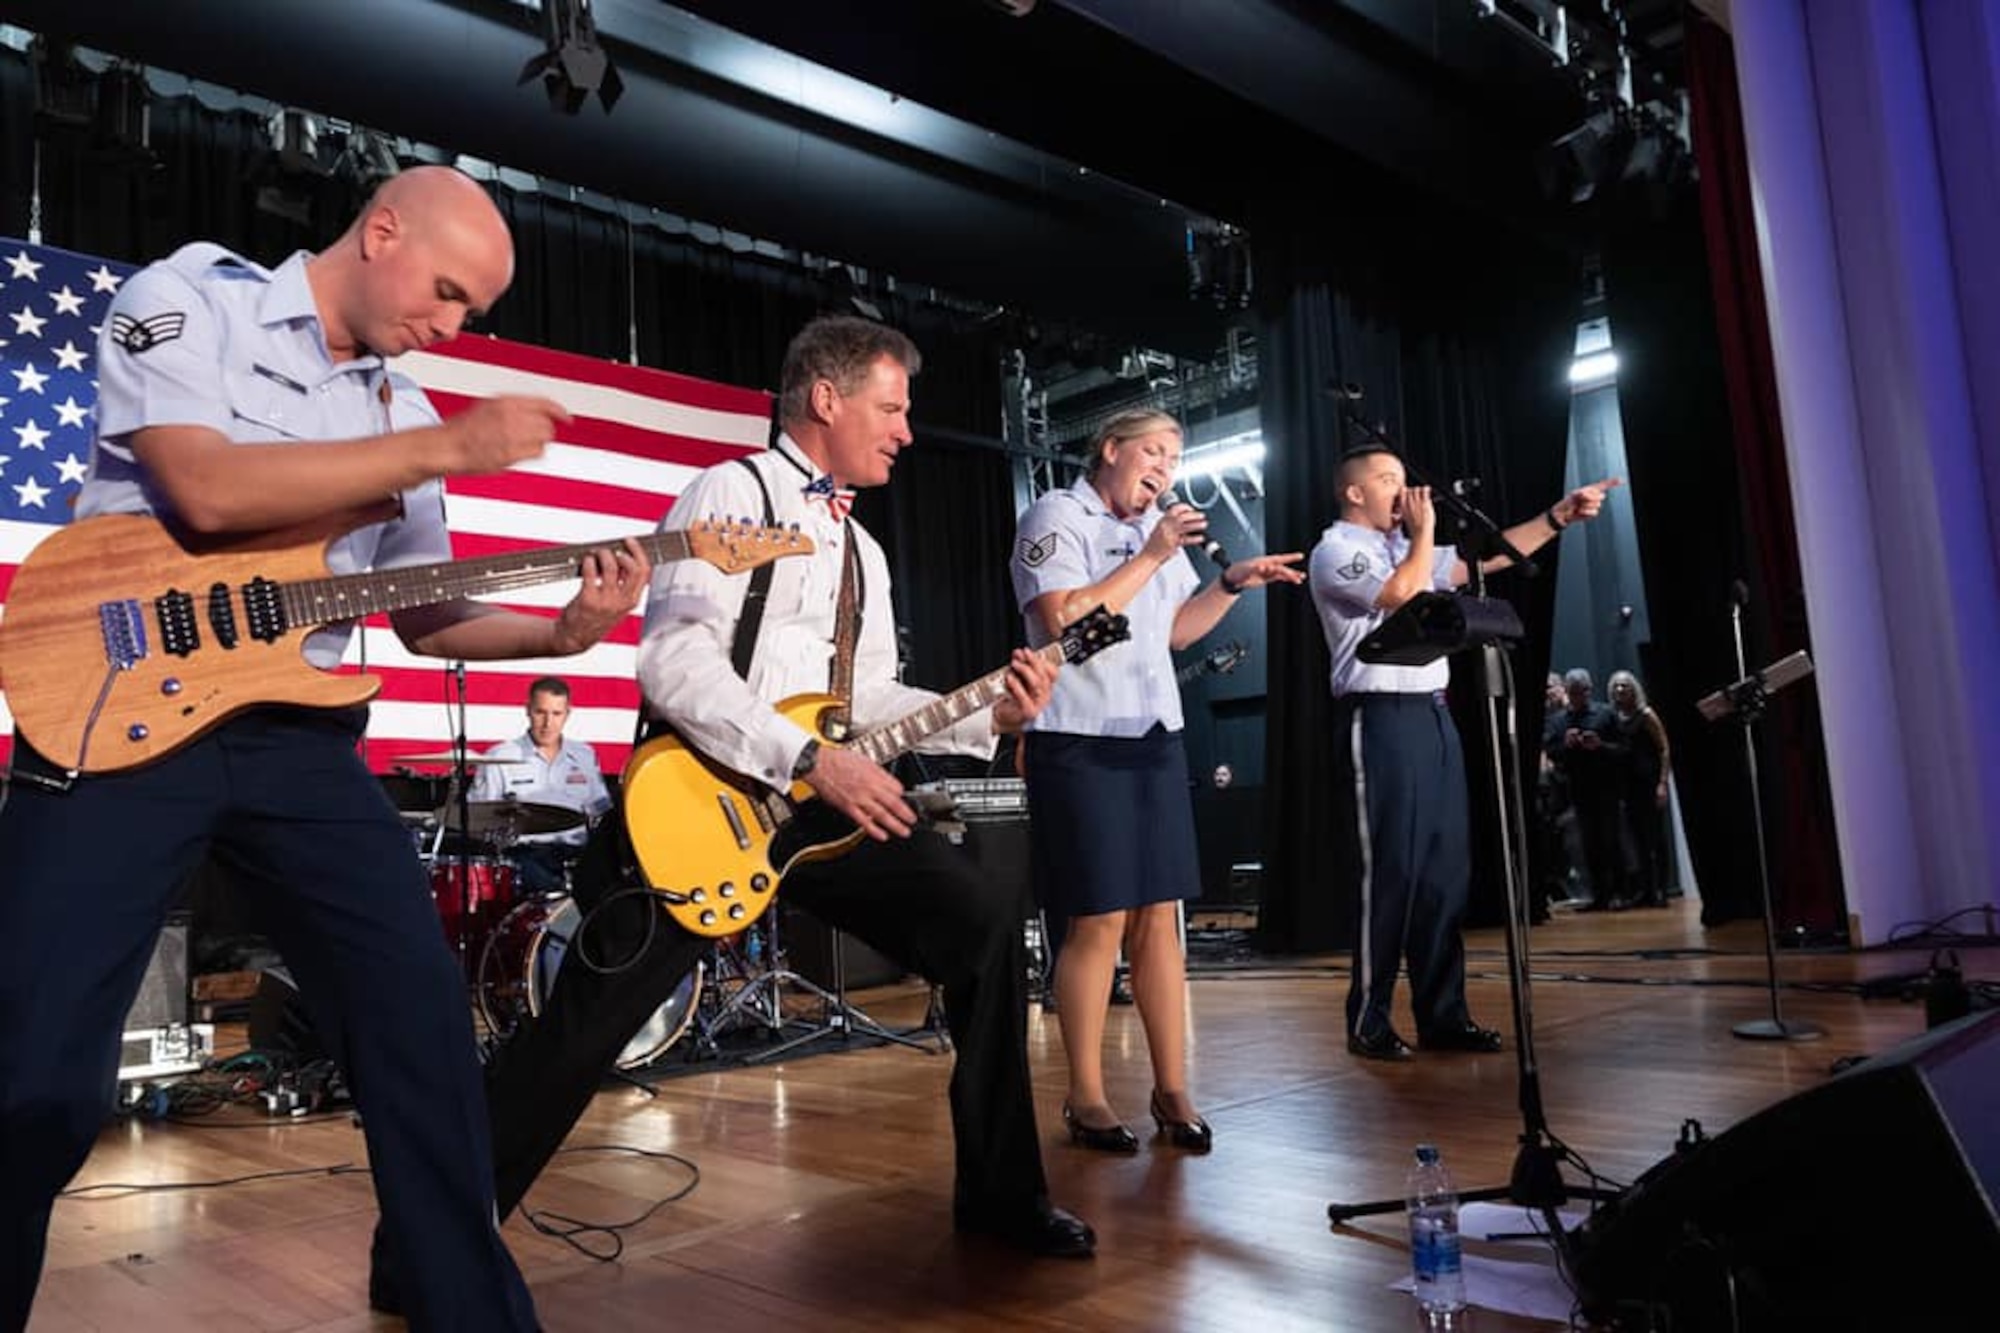 The US Ambassador to New Zealand, The Honorable Scott Philip Brown, joins Small Kine on stage for an electric performance during the US Embassys Independence day Celebrations.